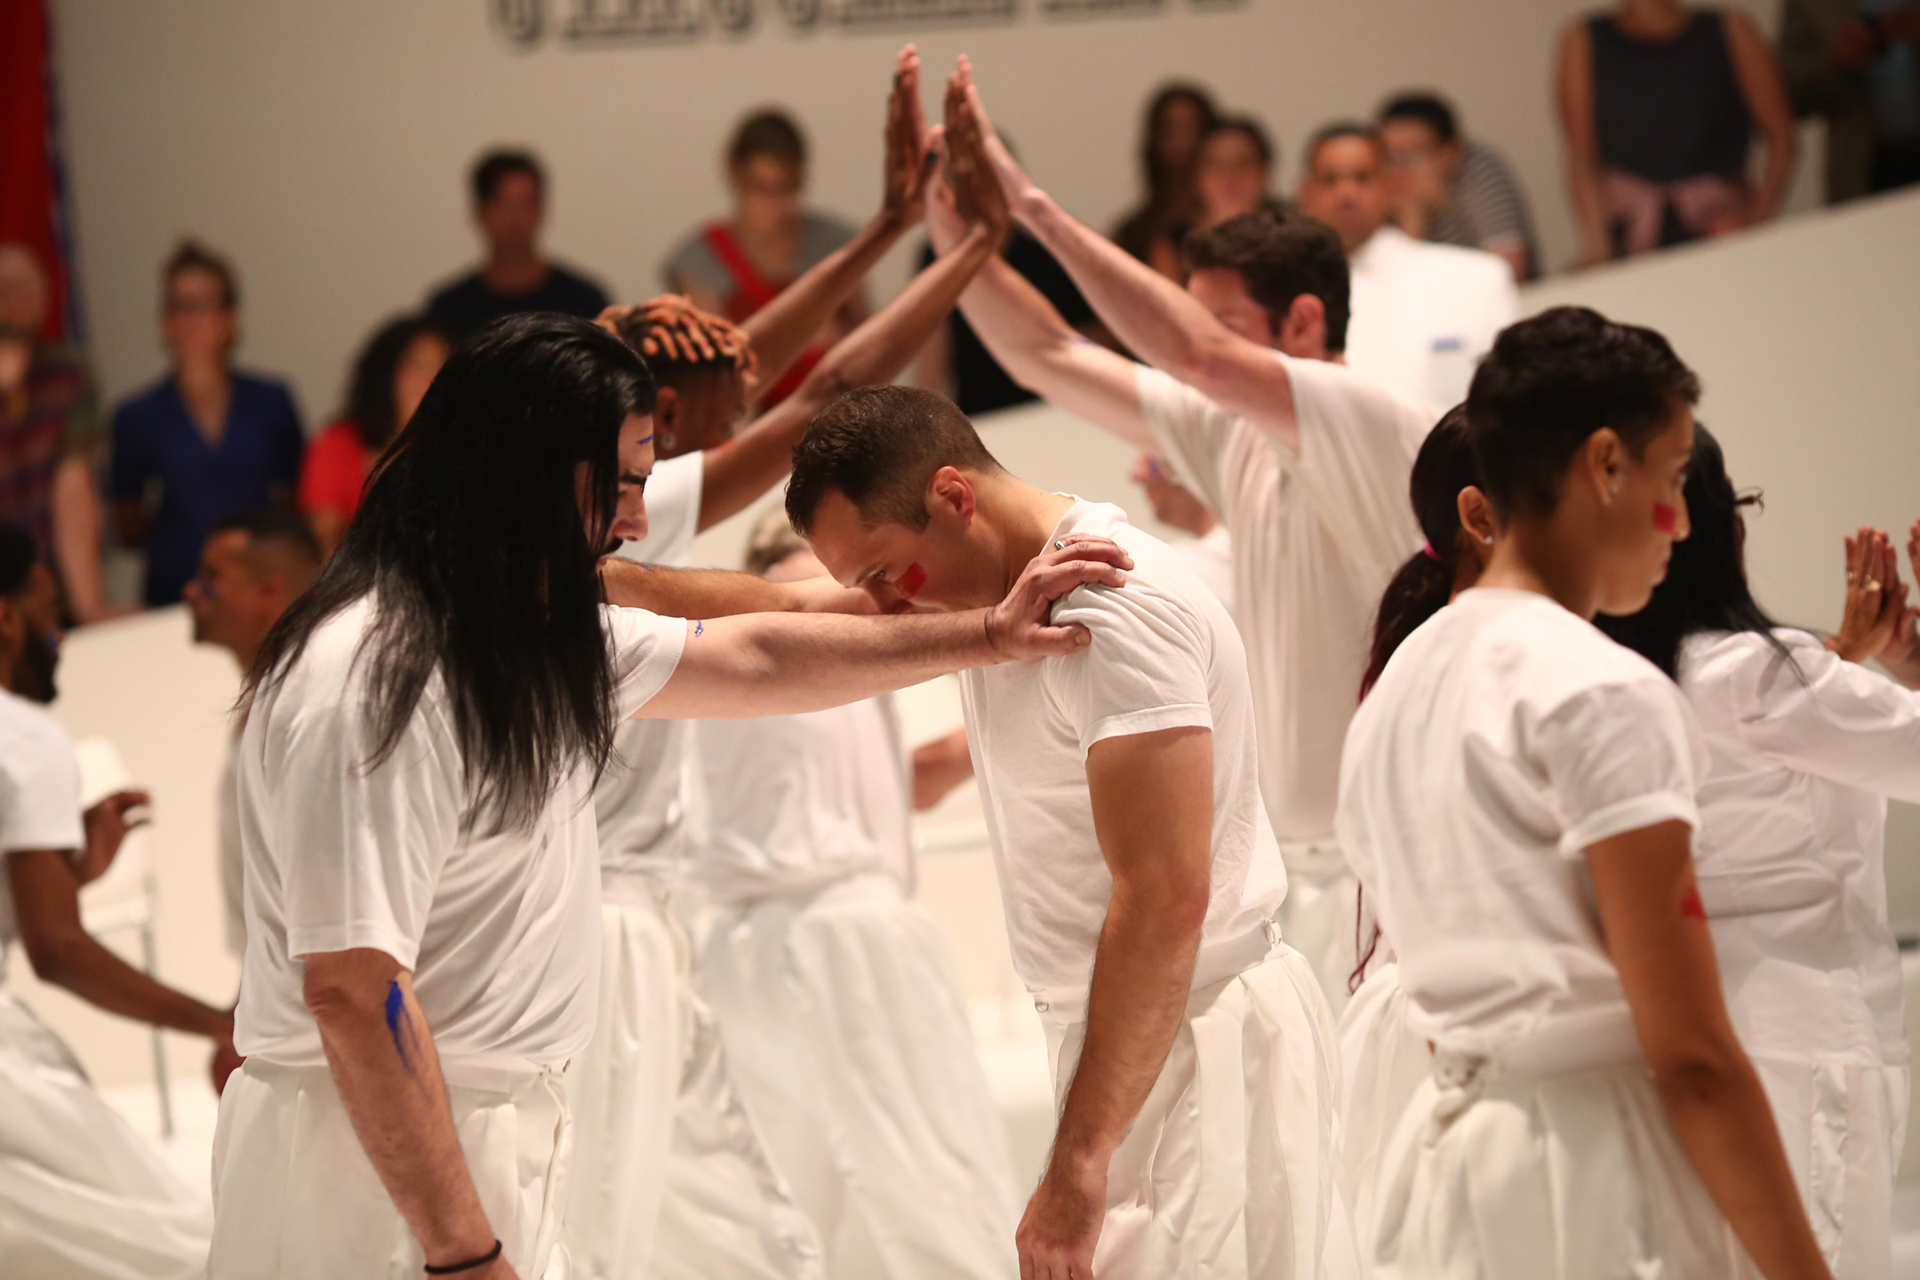 People in white joining hands and grasping each others' shoulders.